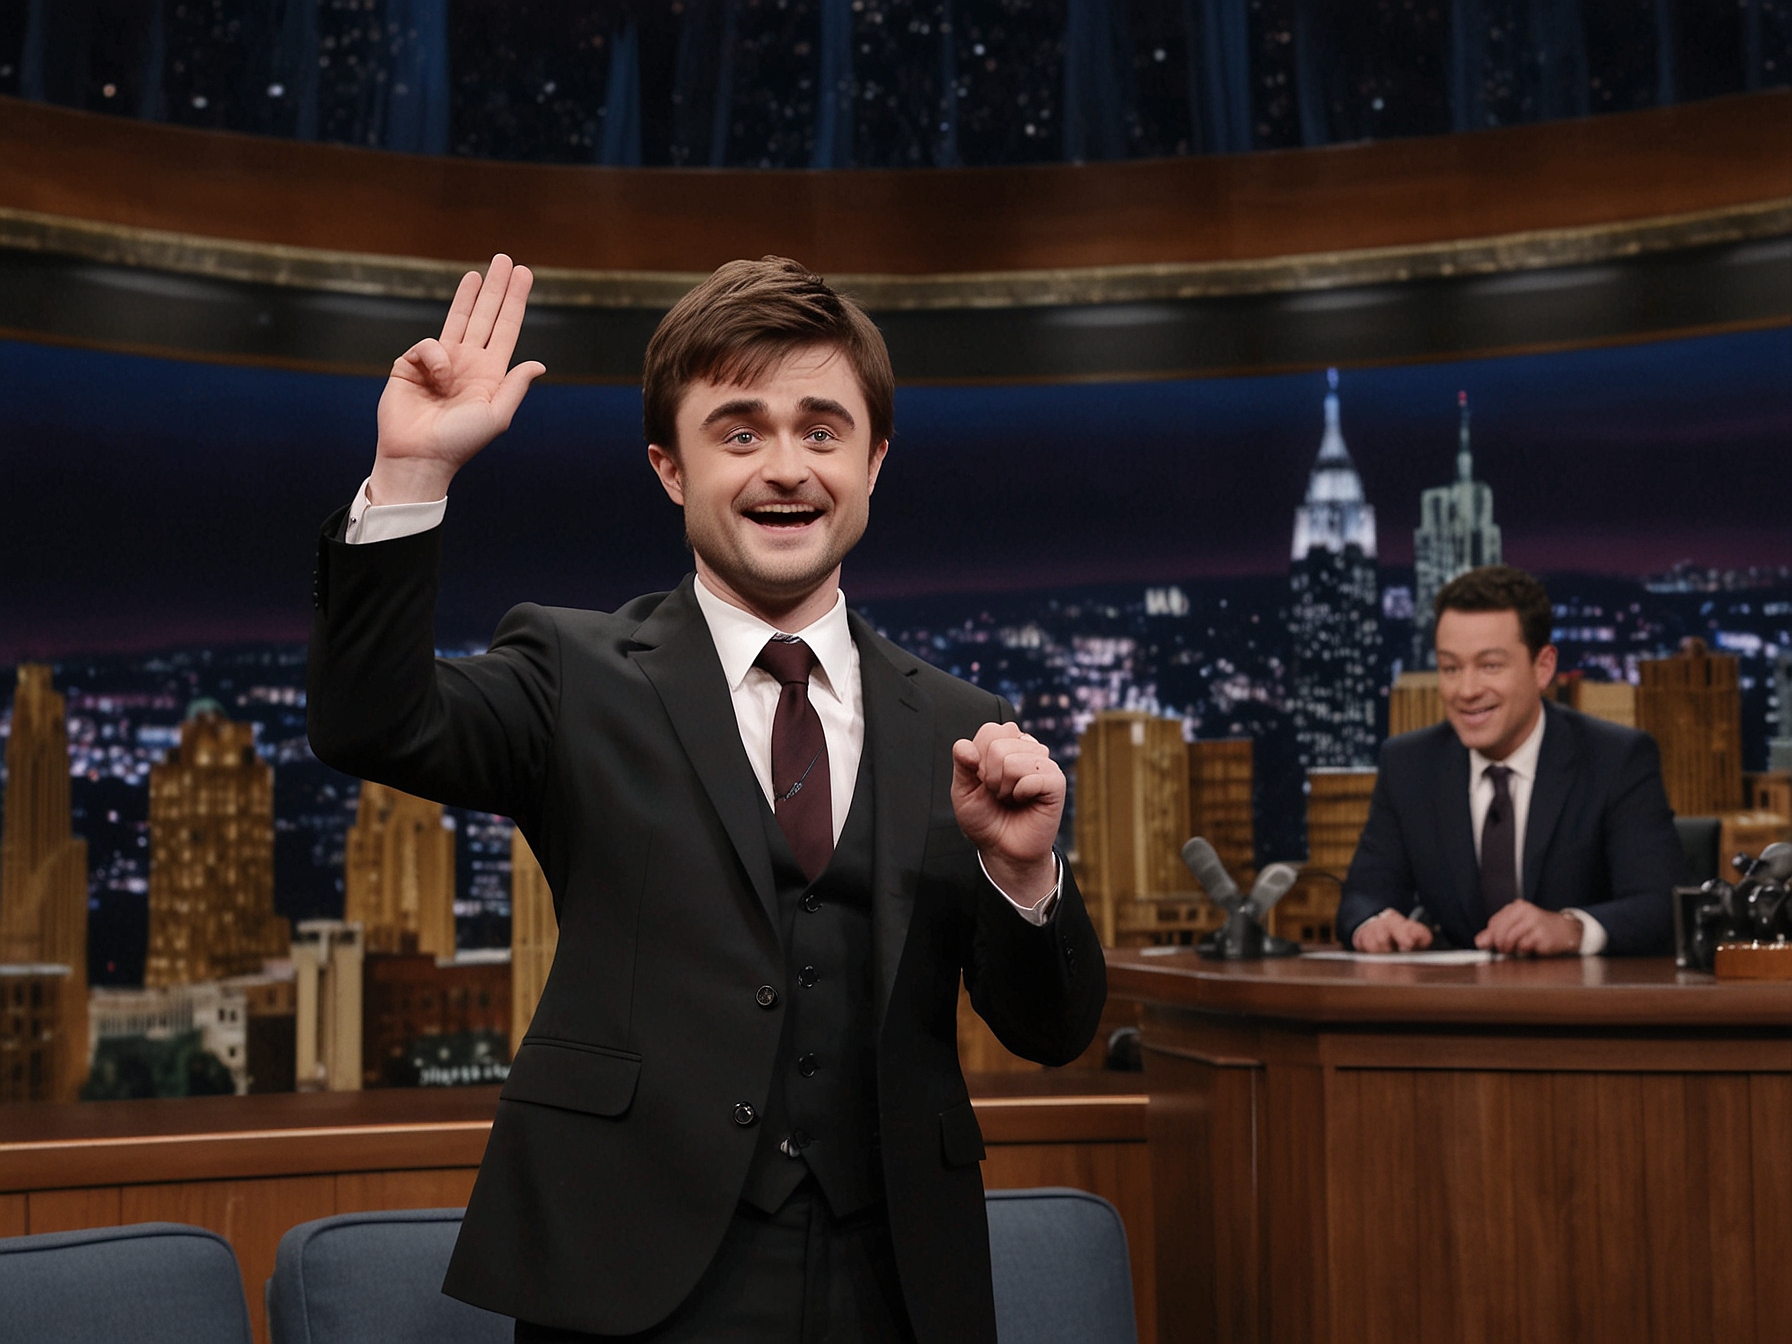 Daniel Radcliffe confidently raps 'Alphabet Aerobics' on 'The Tonight Show with Jimmy Fallon,' leaving both Jimmy and the audience in awe with his unexpected talent.